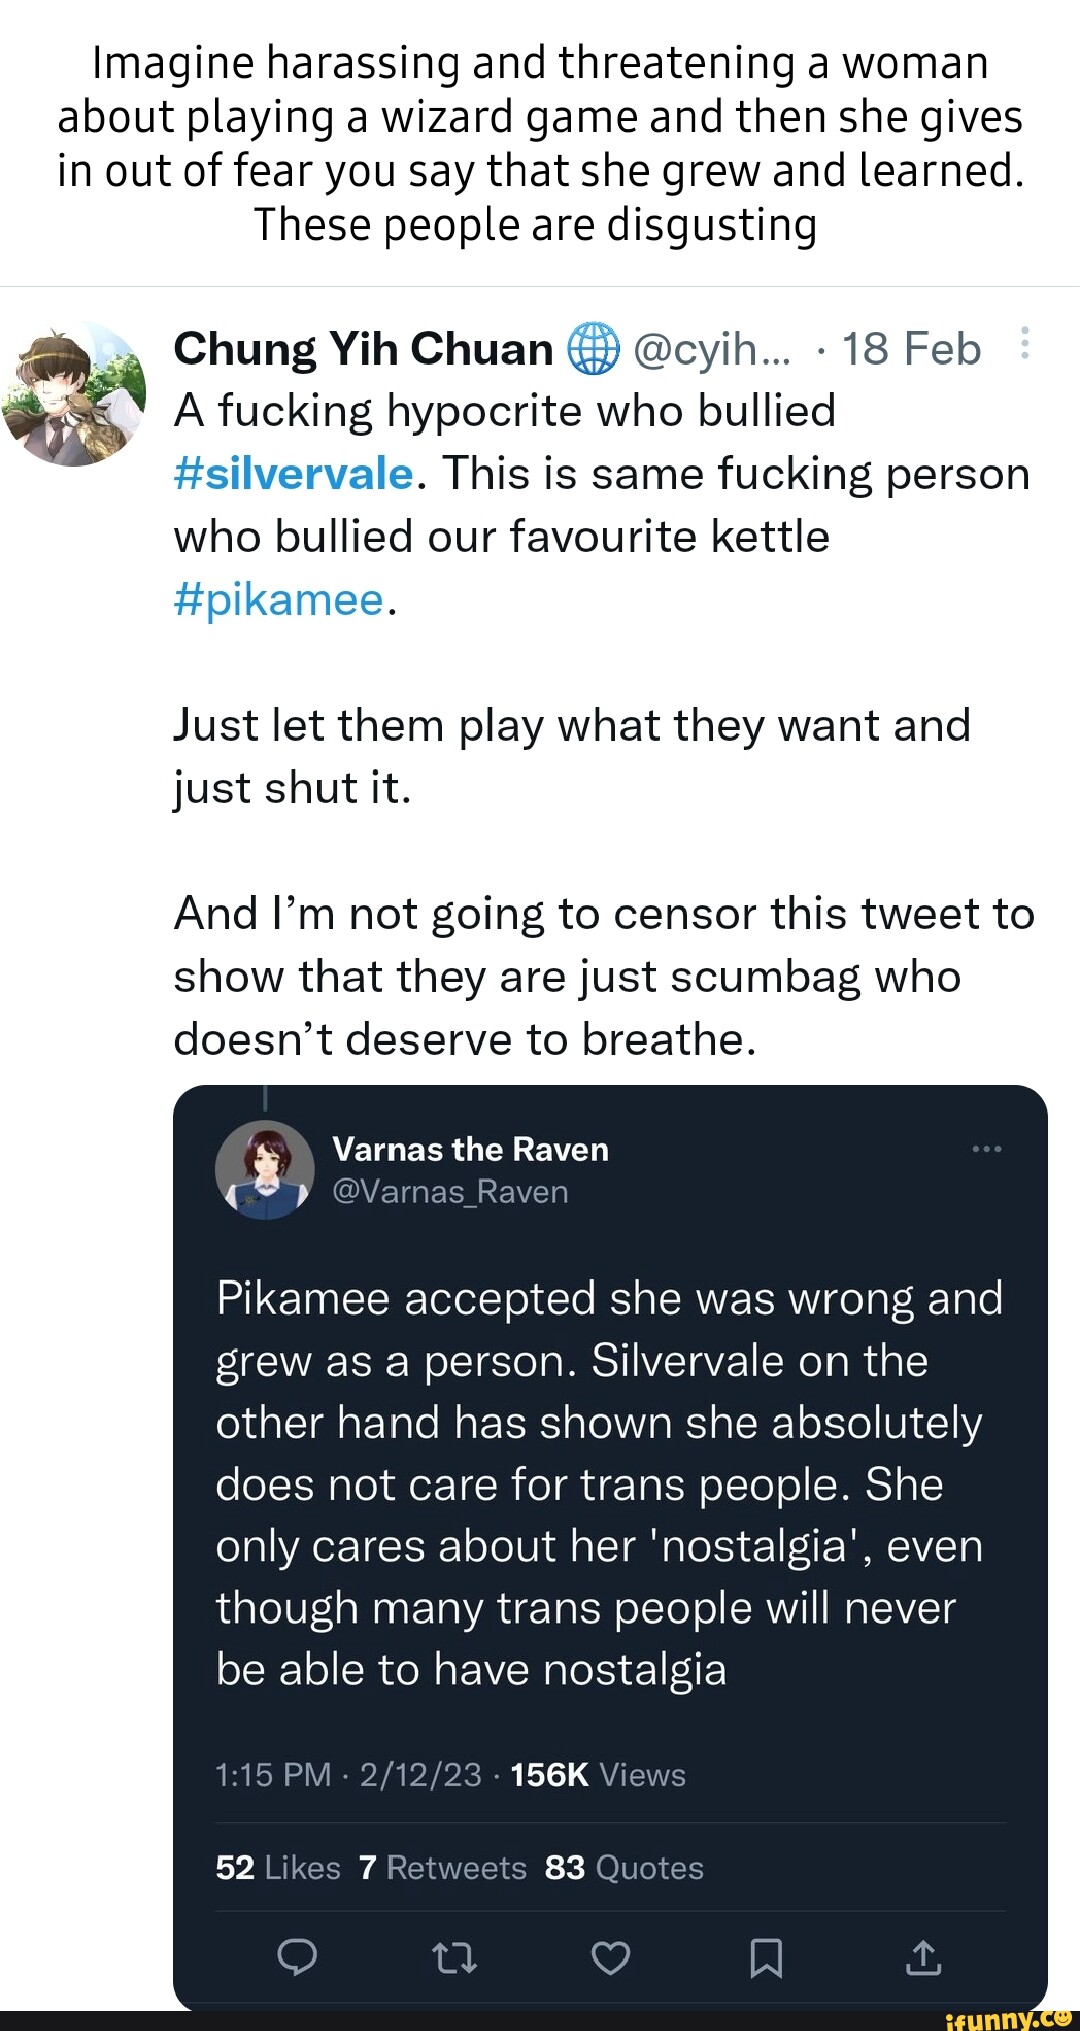 Pikamee, the girl on the left was bullied into retirement by Transgender  community on twitter because she asked her fans if she should stream Hogwarts  Legacy or not. (She had a history